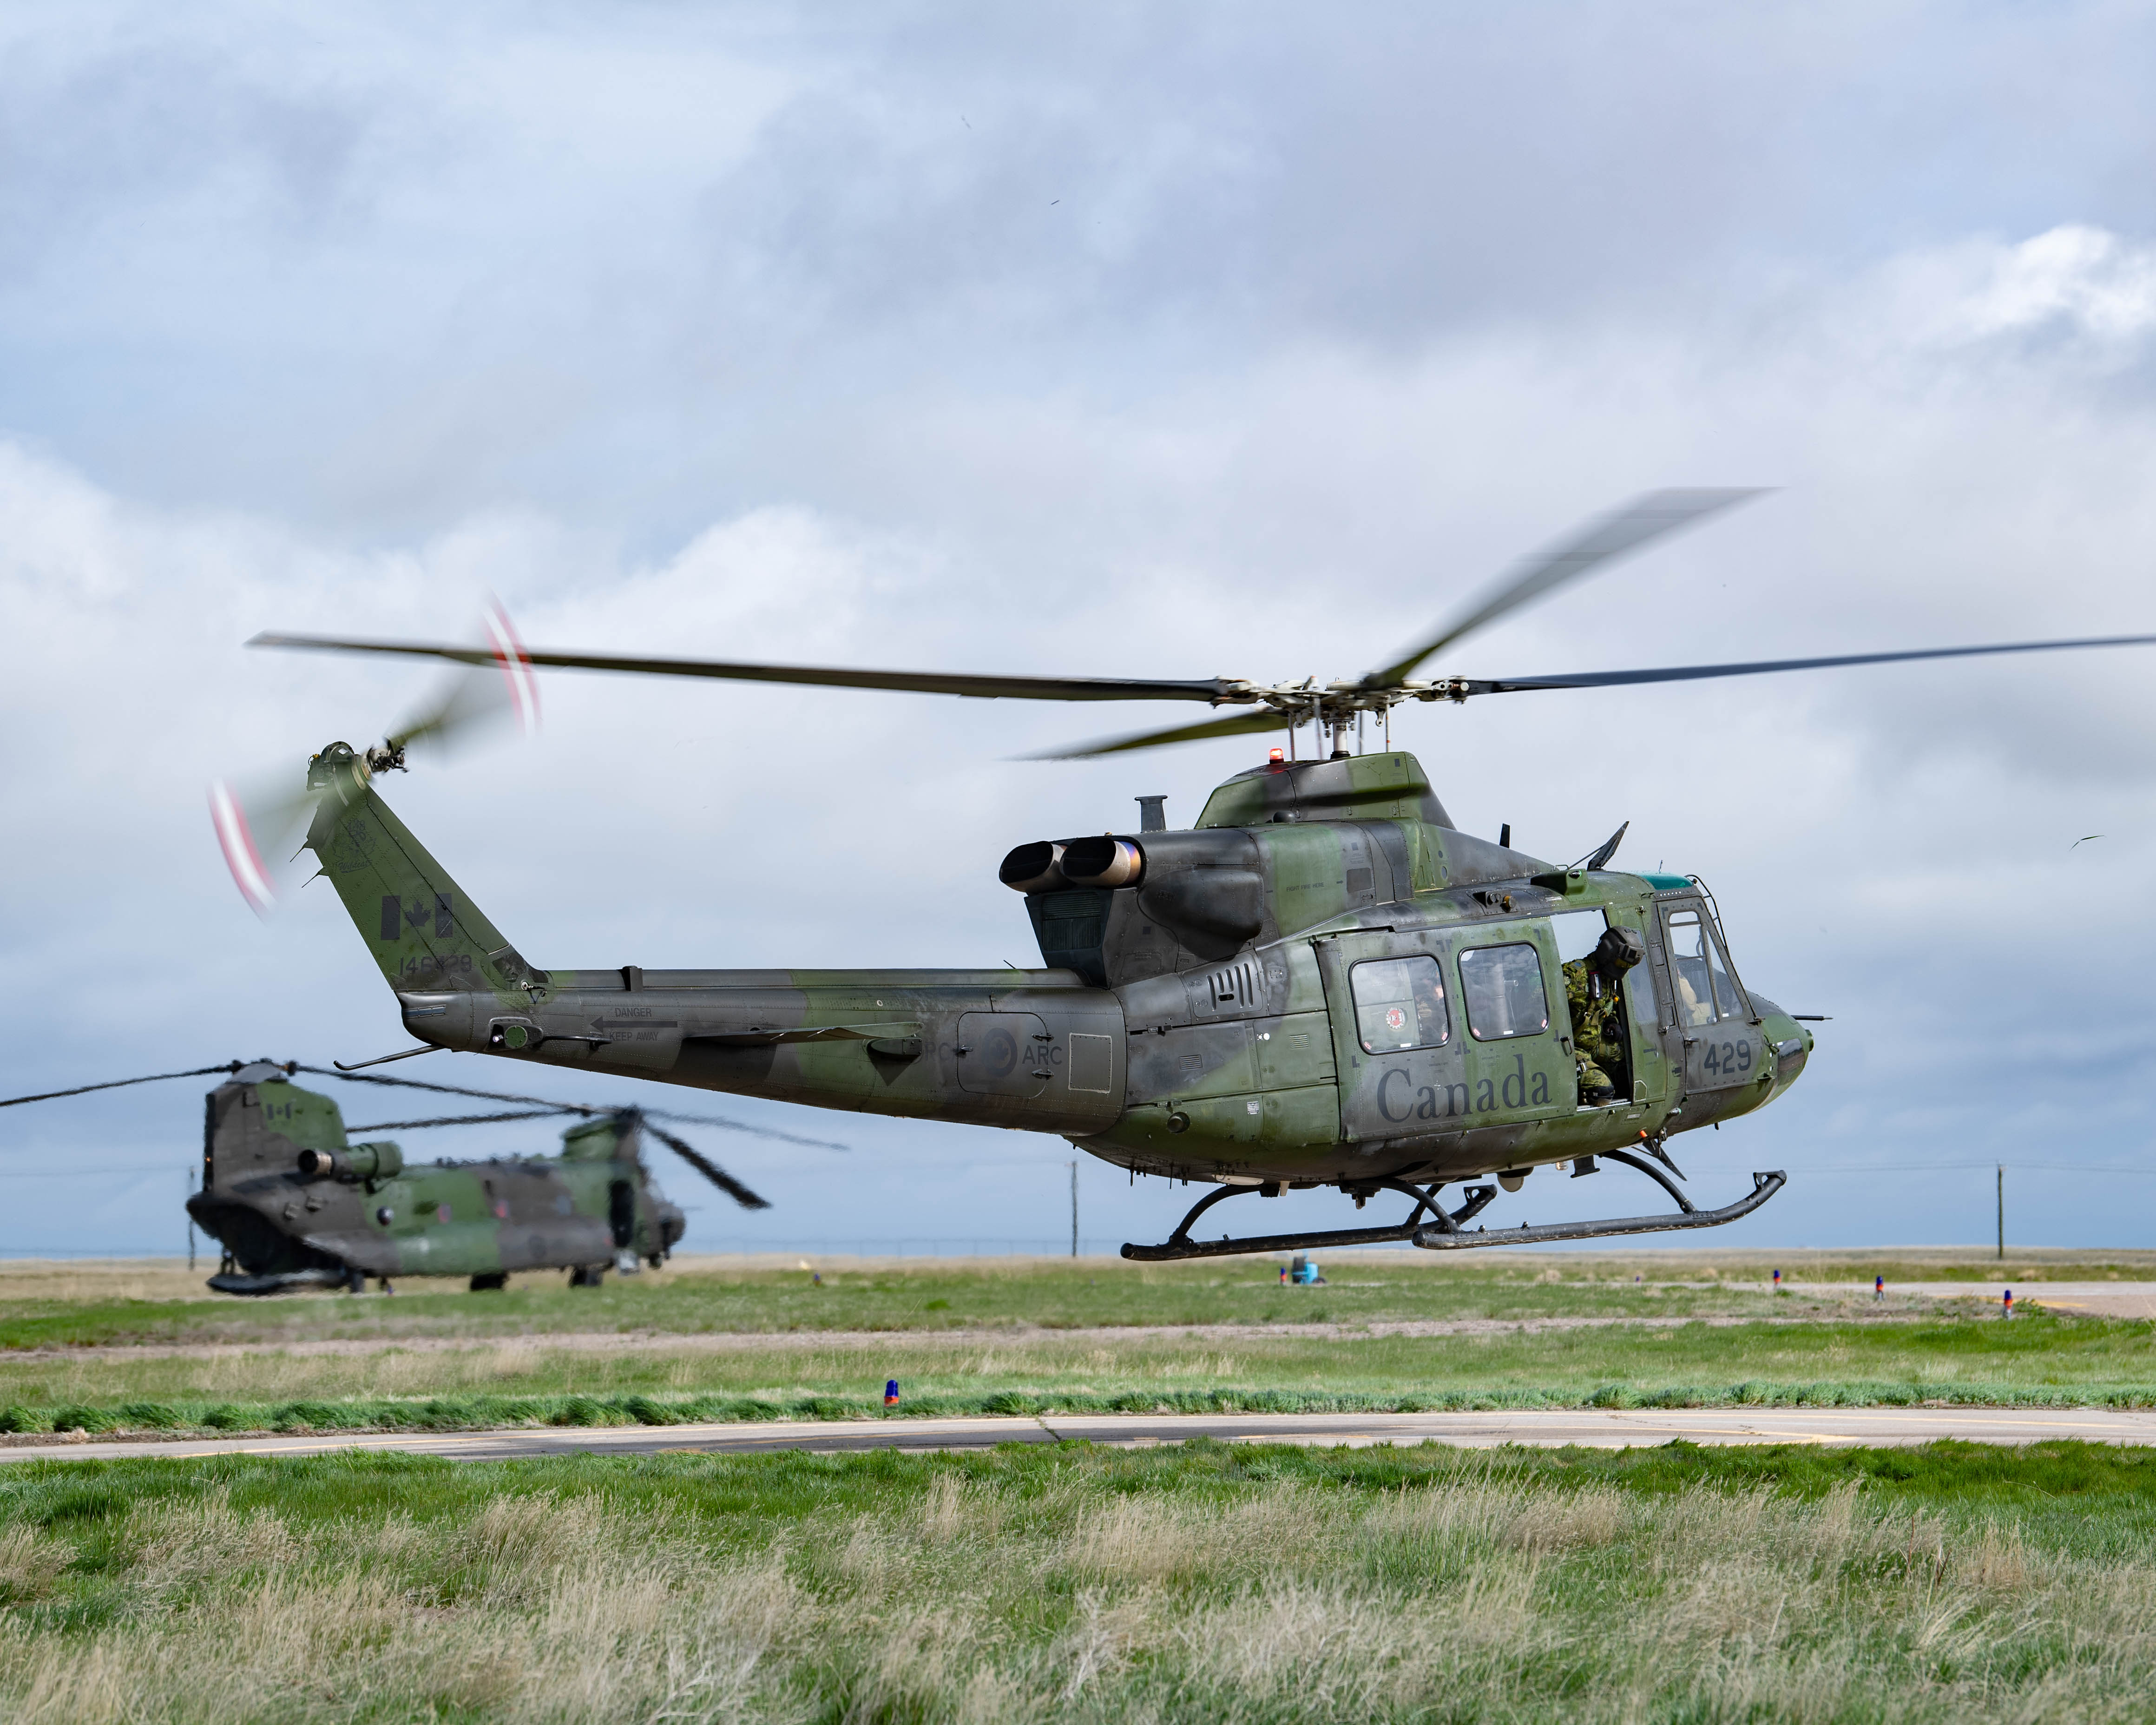 Two military helicopters taking off